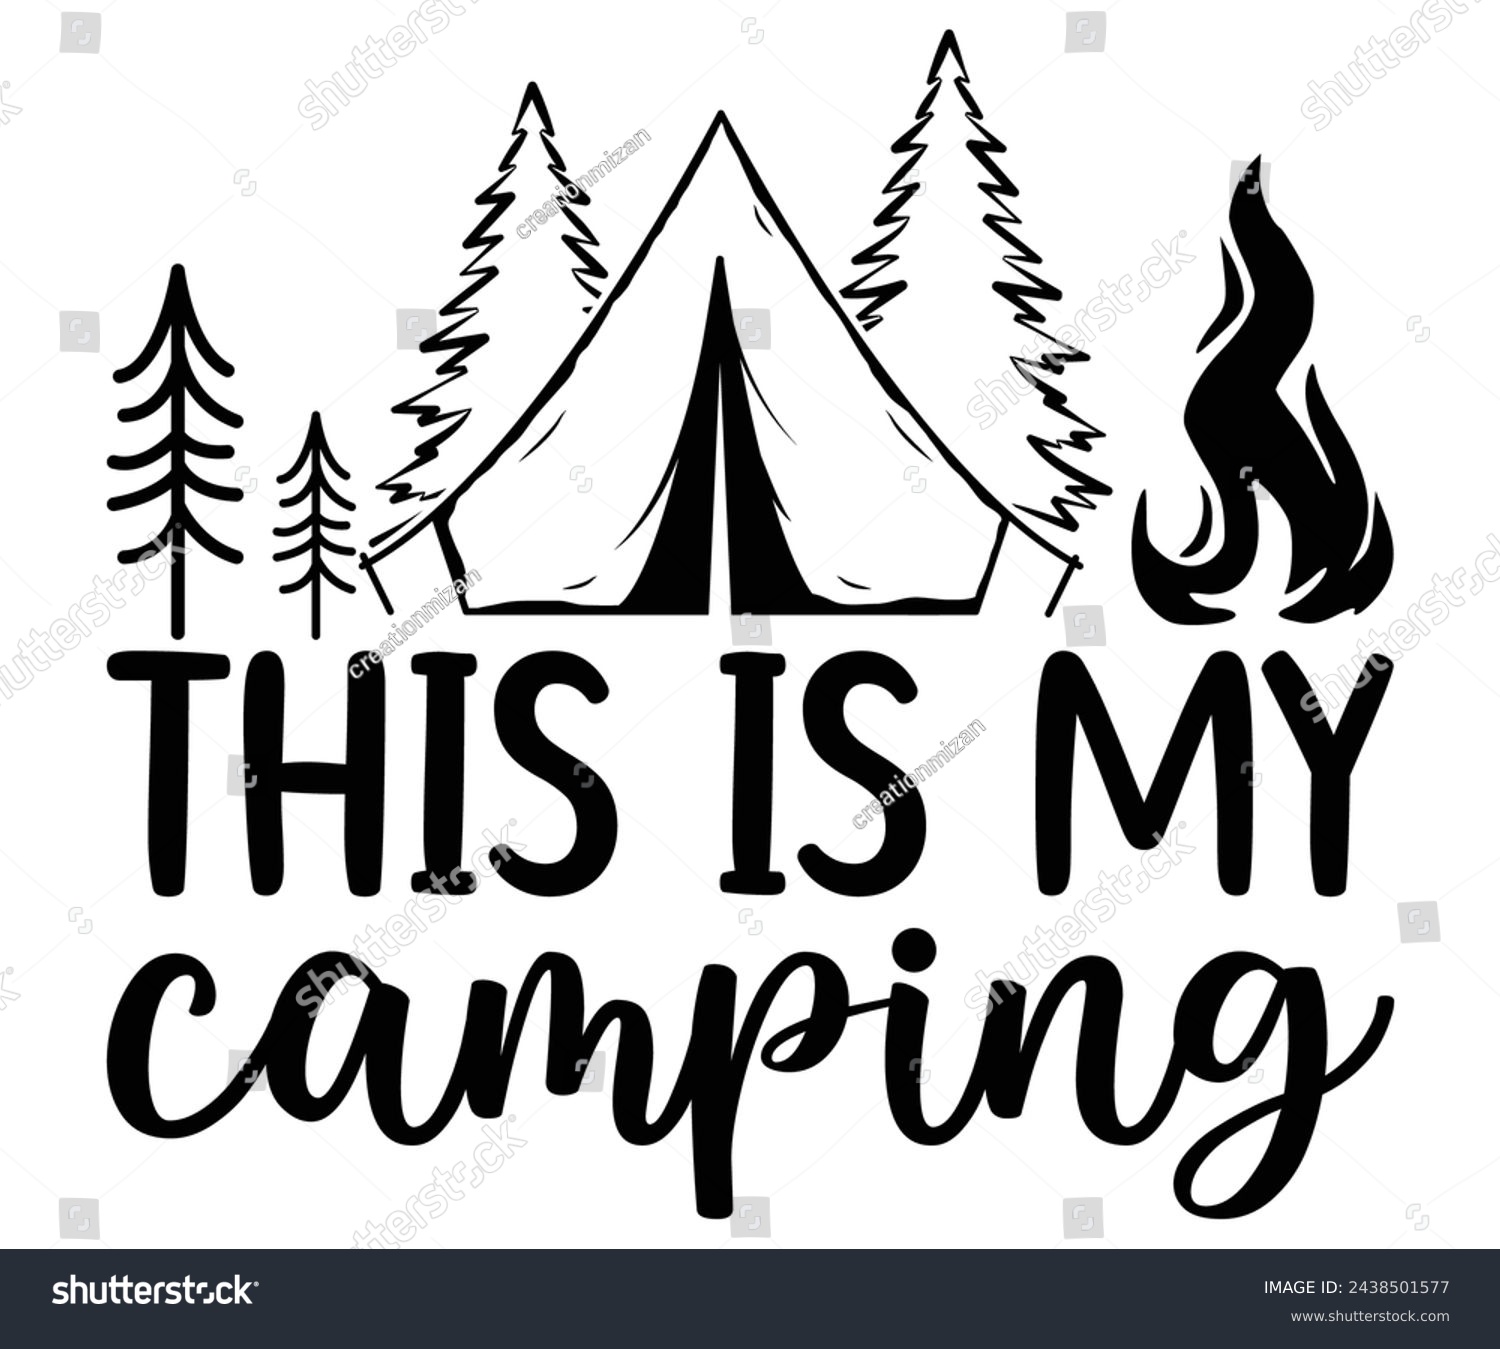 SVG of This is my camping Svg,Camping Svg,Hiking,Funny Camping,Adventure,Summer Camp,Happy Camper,Camp Life,Camp Saying,Camping Shirt svg